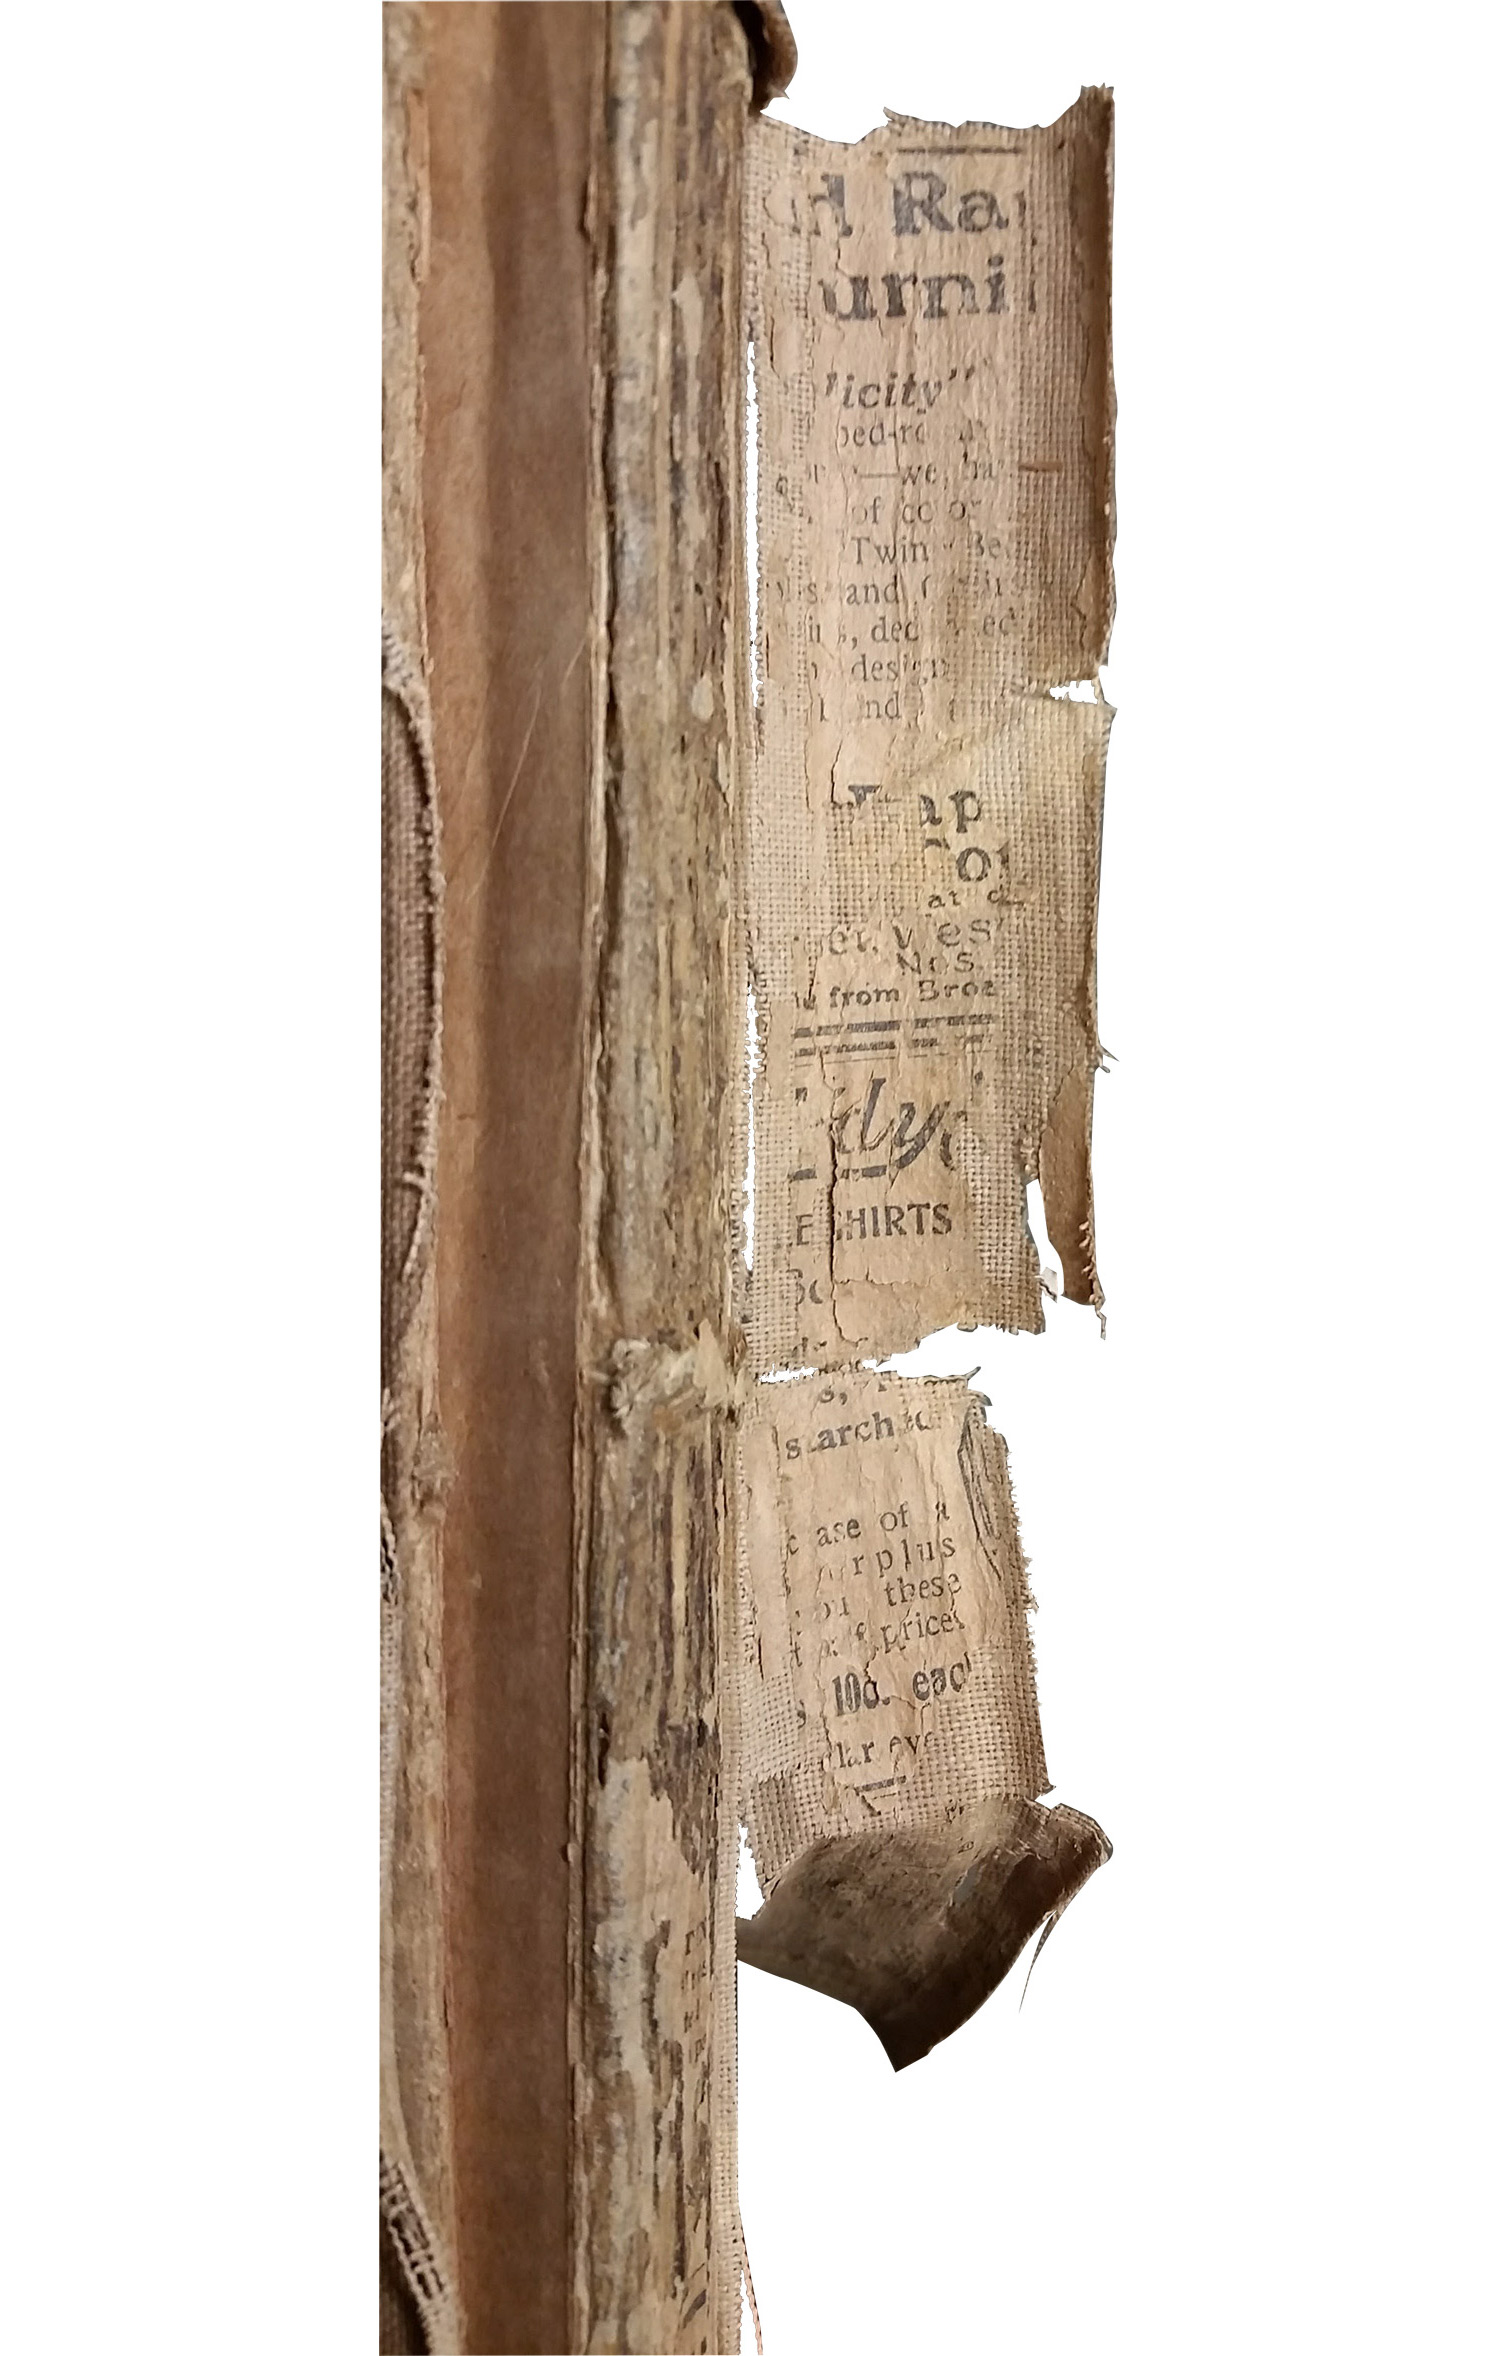 scan of the fragile and decayed binding of the book, some text visible but unreadable